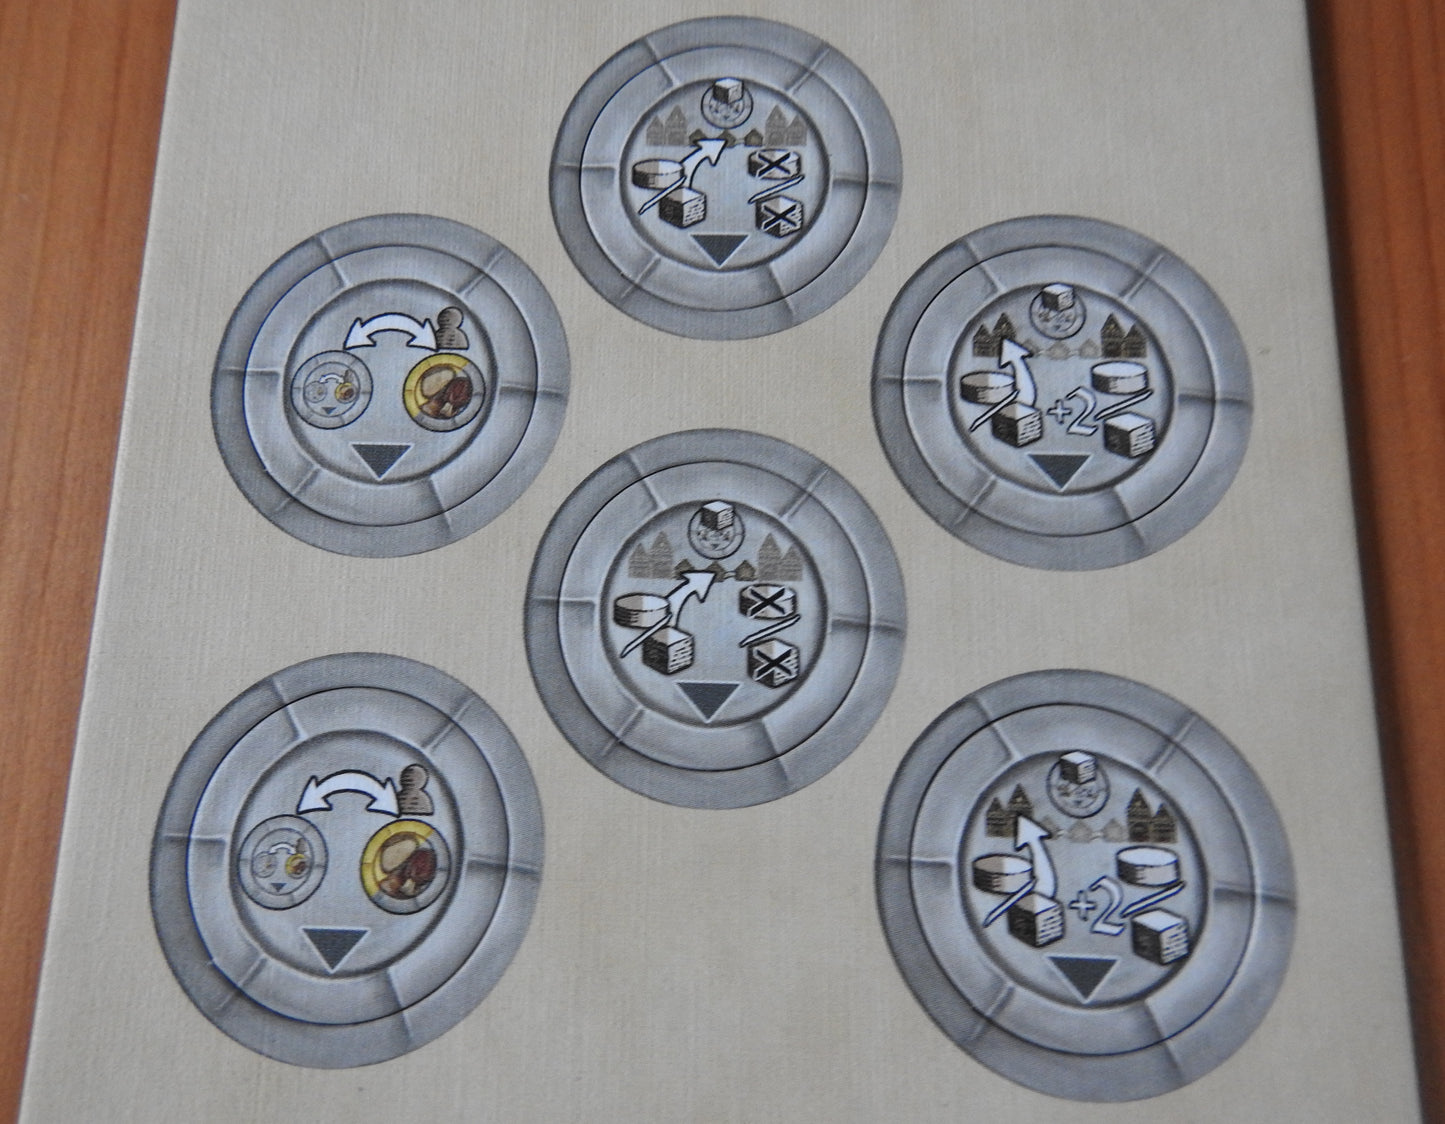 Close-up view of the front of the tokens, which come in 3 different types.